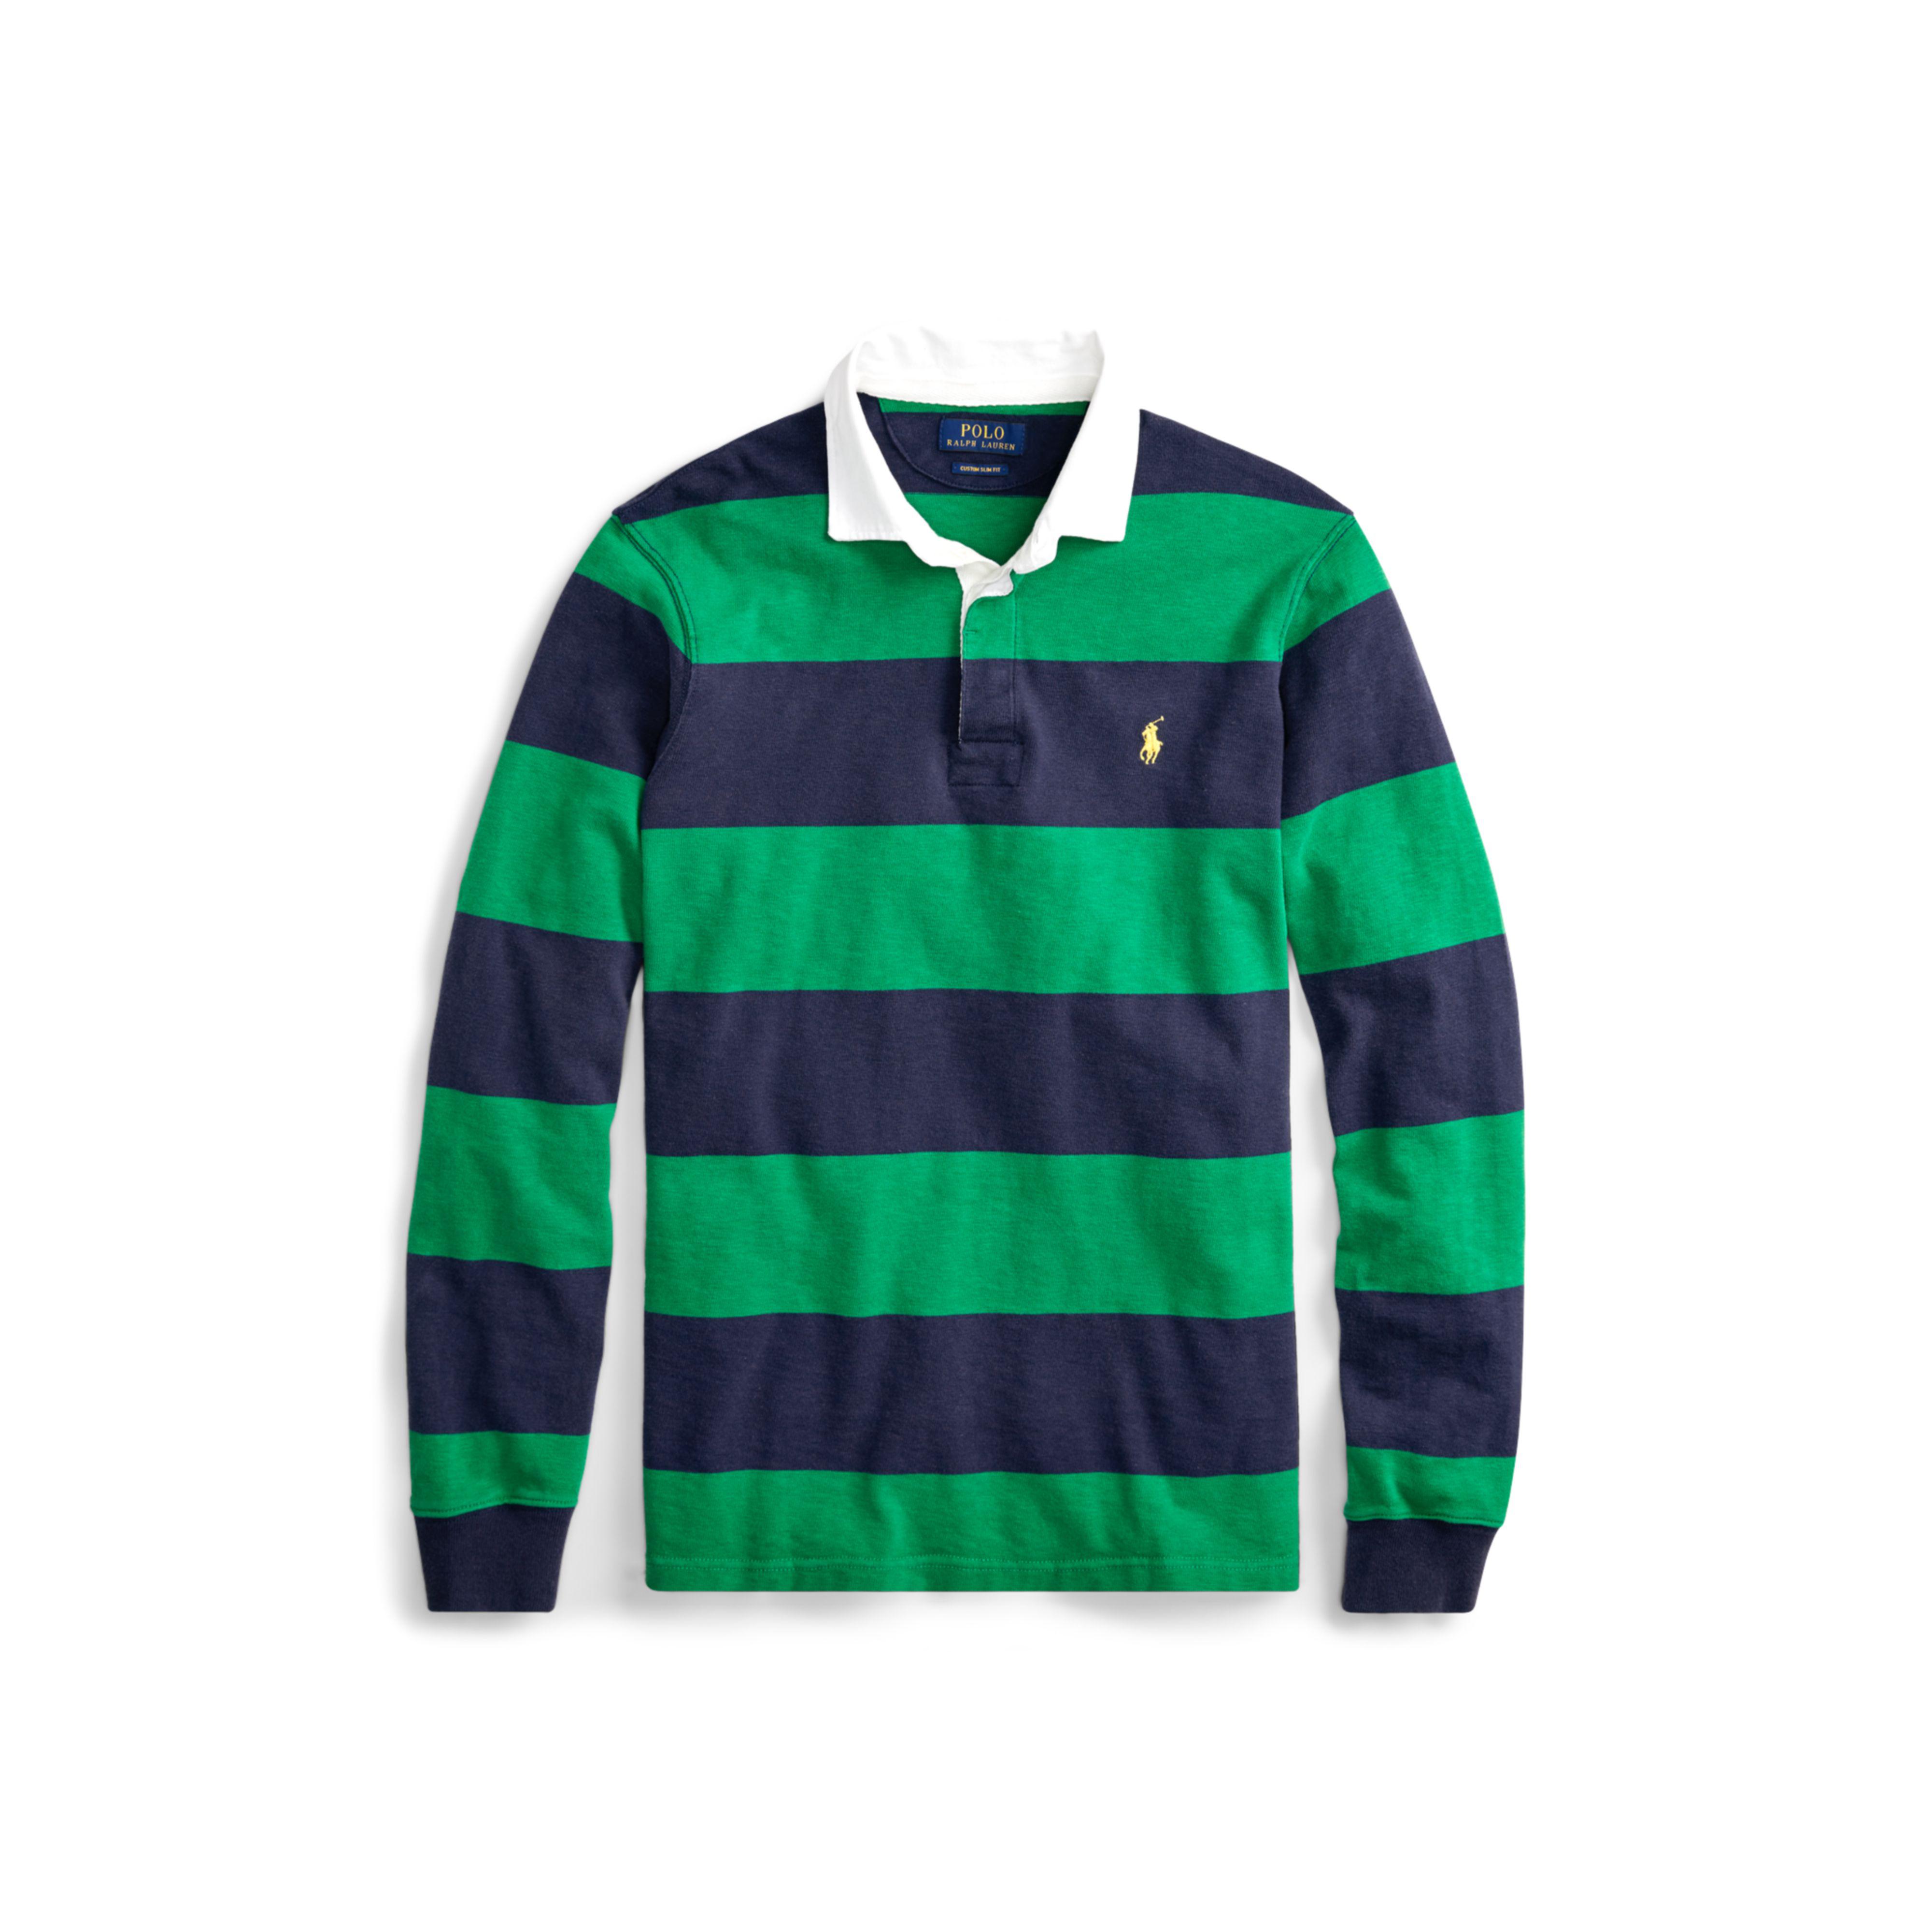 Polo Ralph Lauren The Iconic Rugby Shirt Best Sale, 53% OFF 